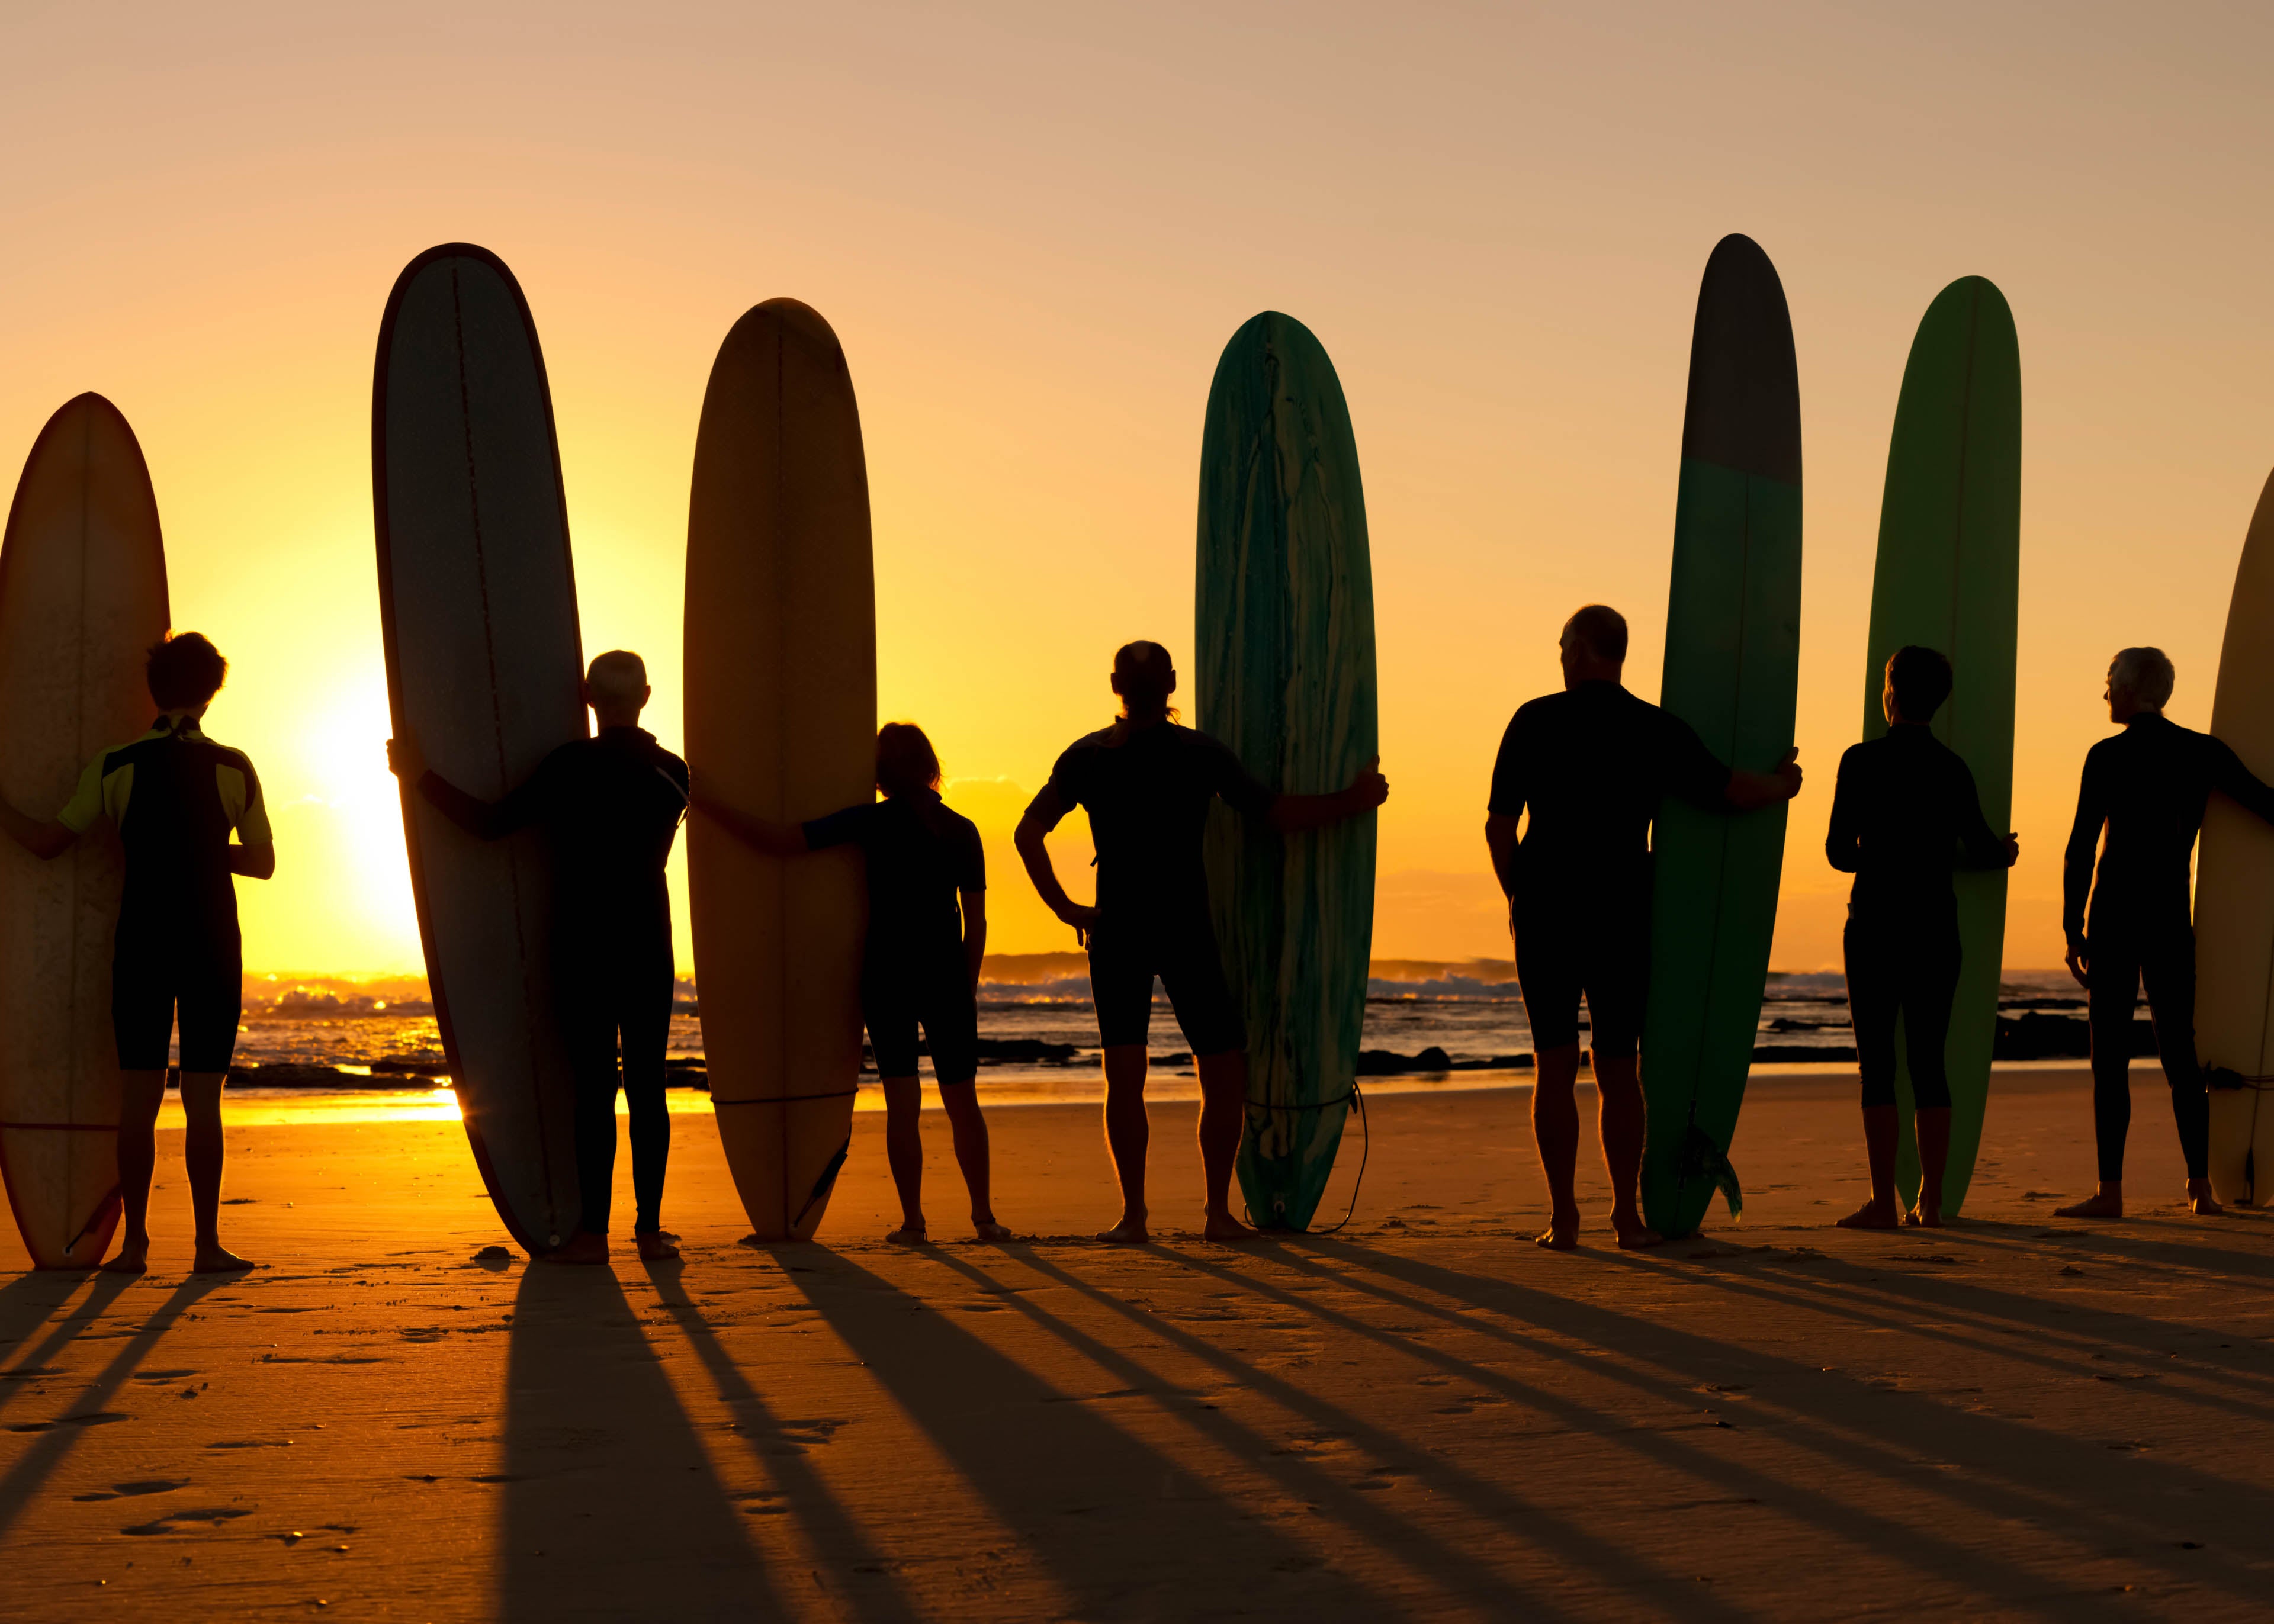 Surfers on beach at sunset iStock 171252100 crop 840x600 02f95c07 94af 4a6c 9fa7 2a2cb7130ea5